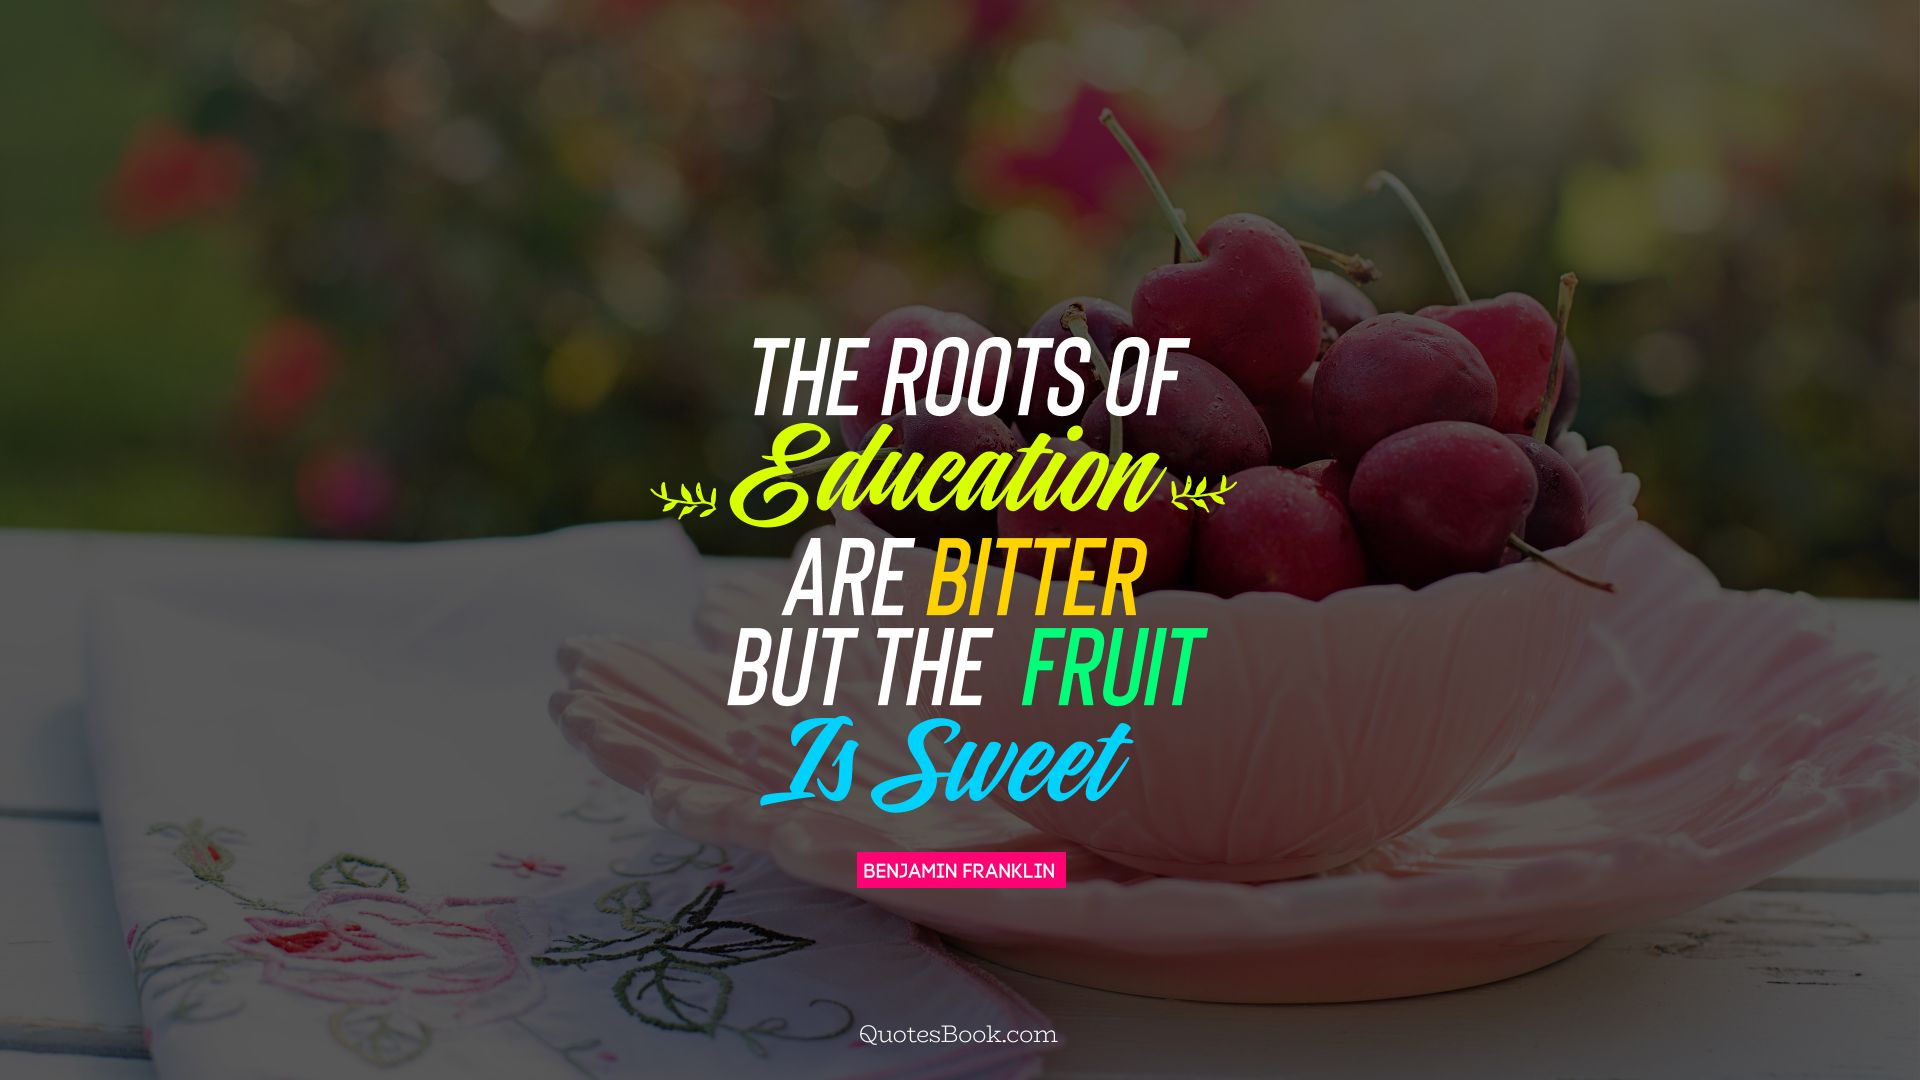 The roots of education  are bitter but the  fruit is sweet. - Quote by Benjamin Franklin